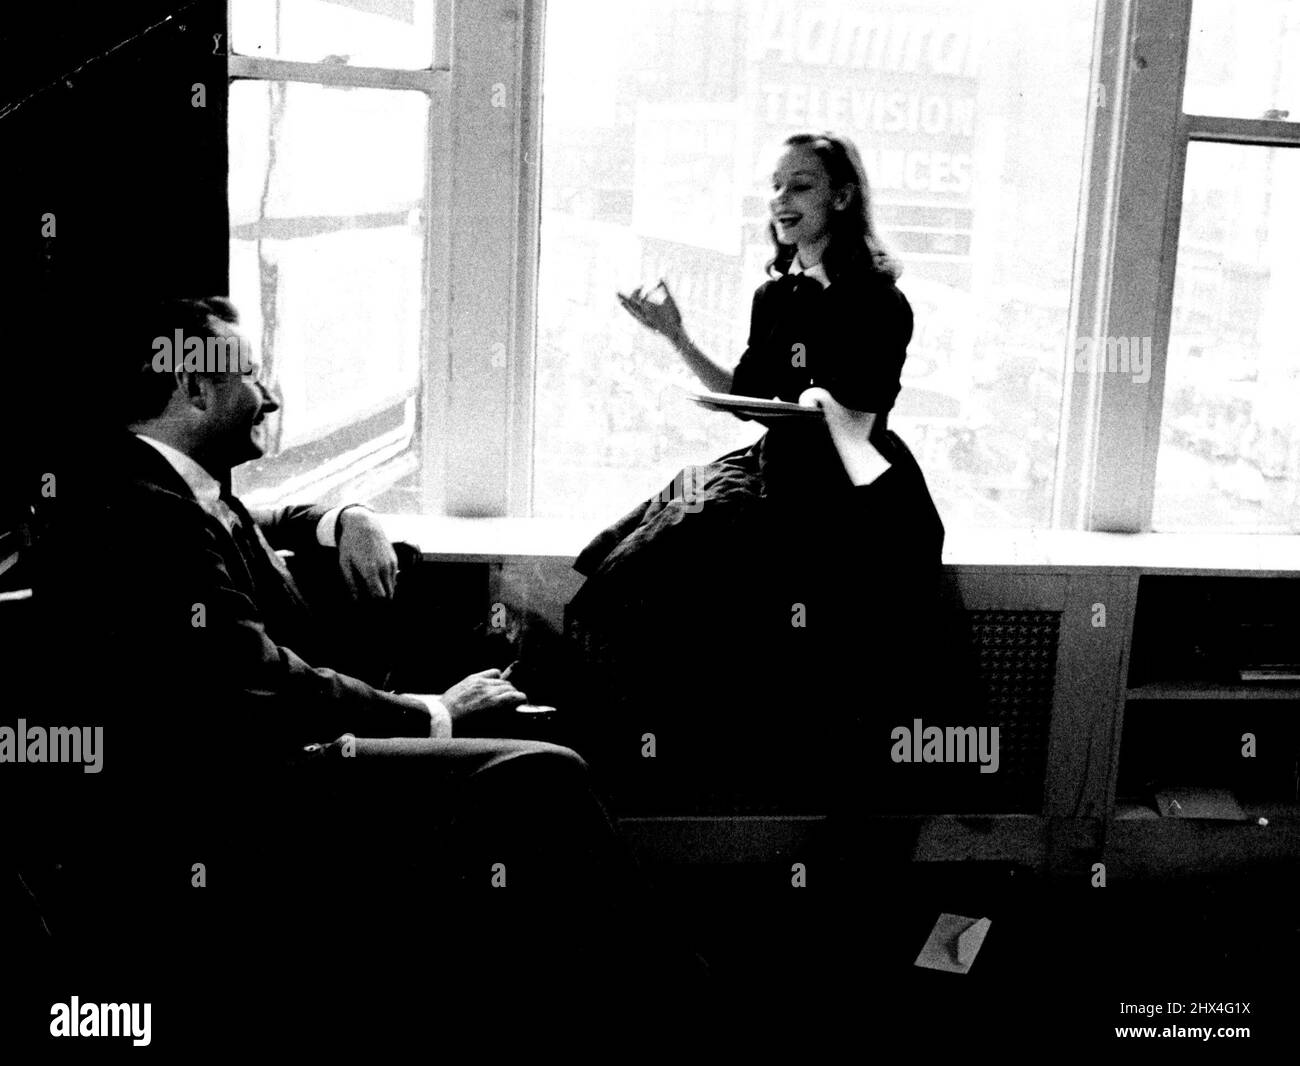 Producer Robert Whitehead smiles his appreciation as Susan reads him a trial script. Although she concentrates hard, she looks relaxed and happy. She likes corny serials. July 8, 1955. (Photo by Look Magazine). Stock Photo